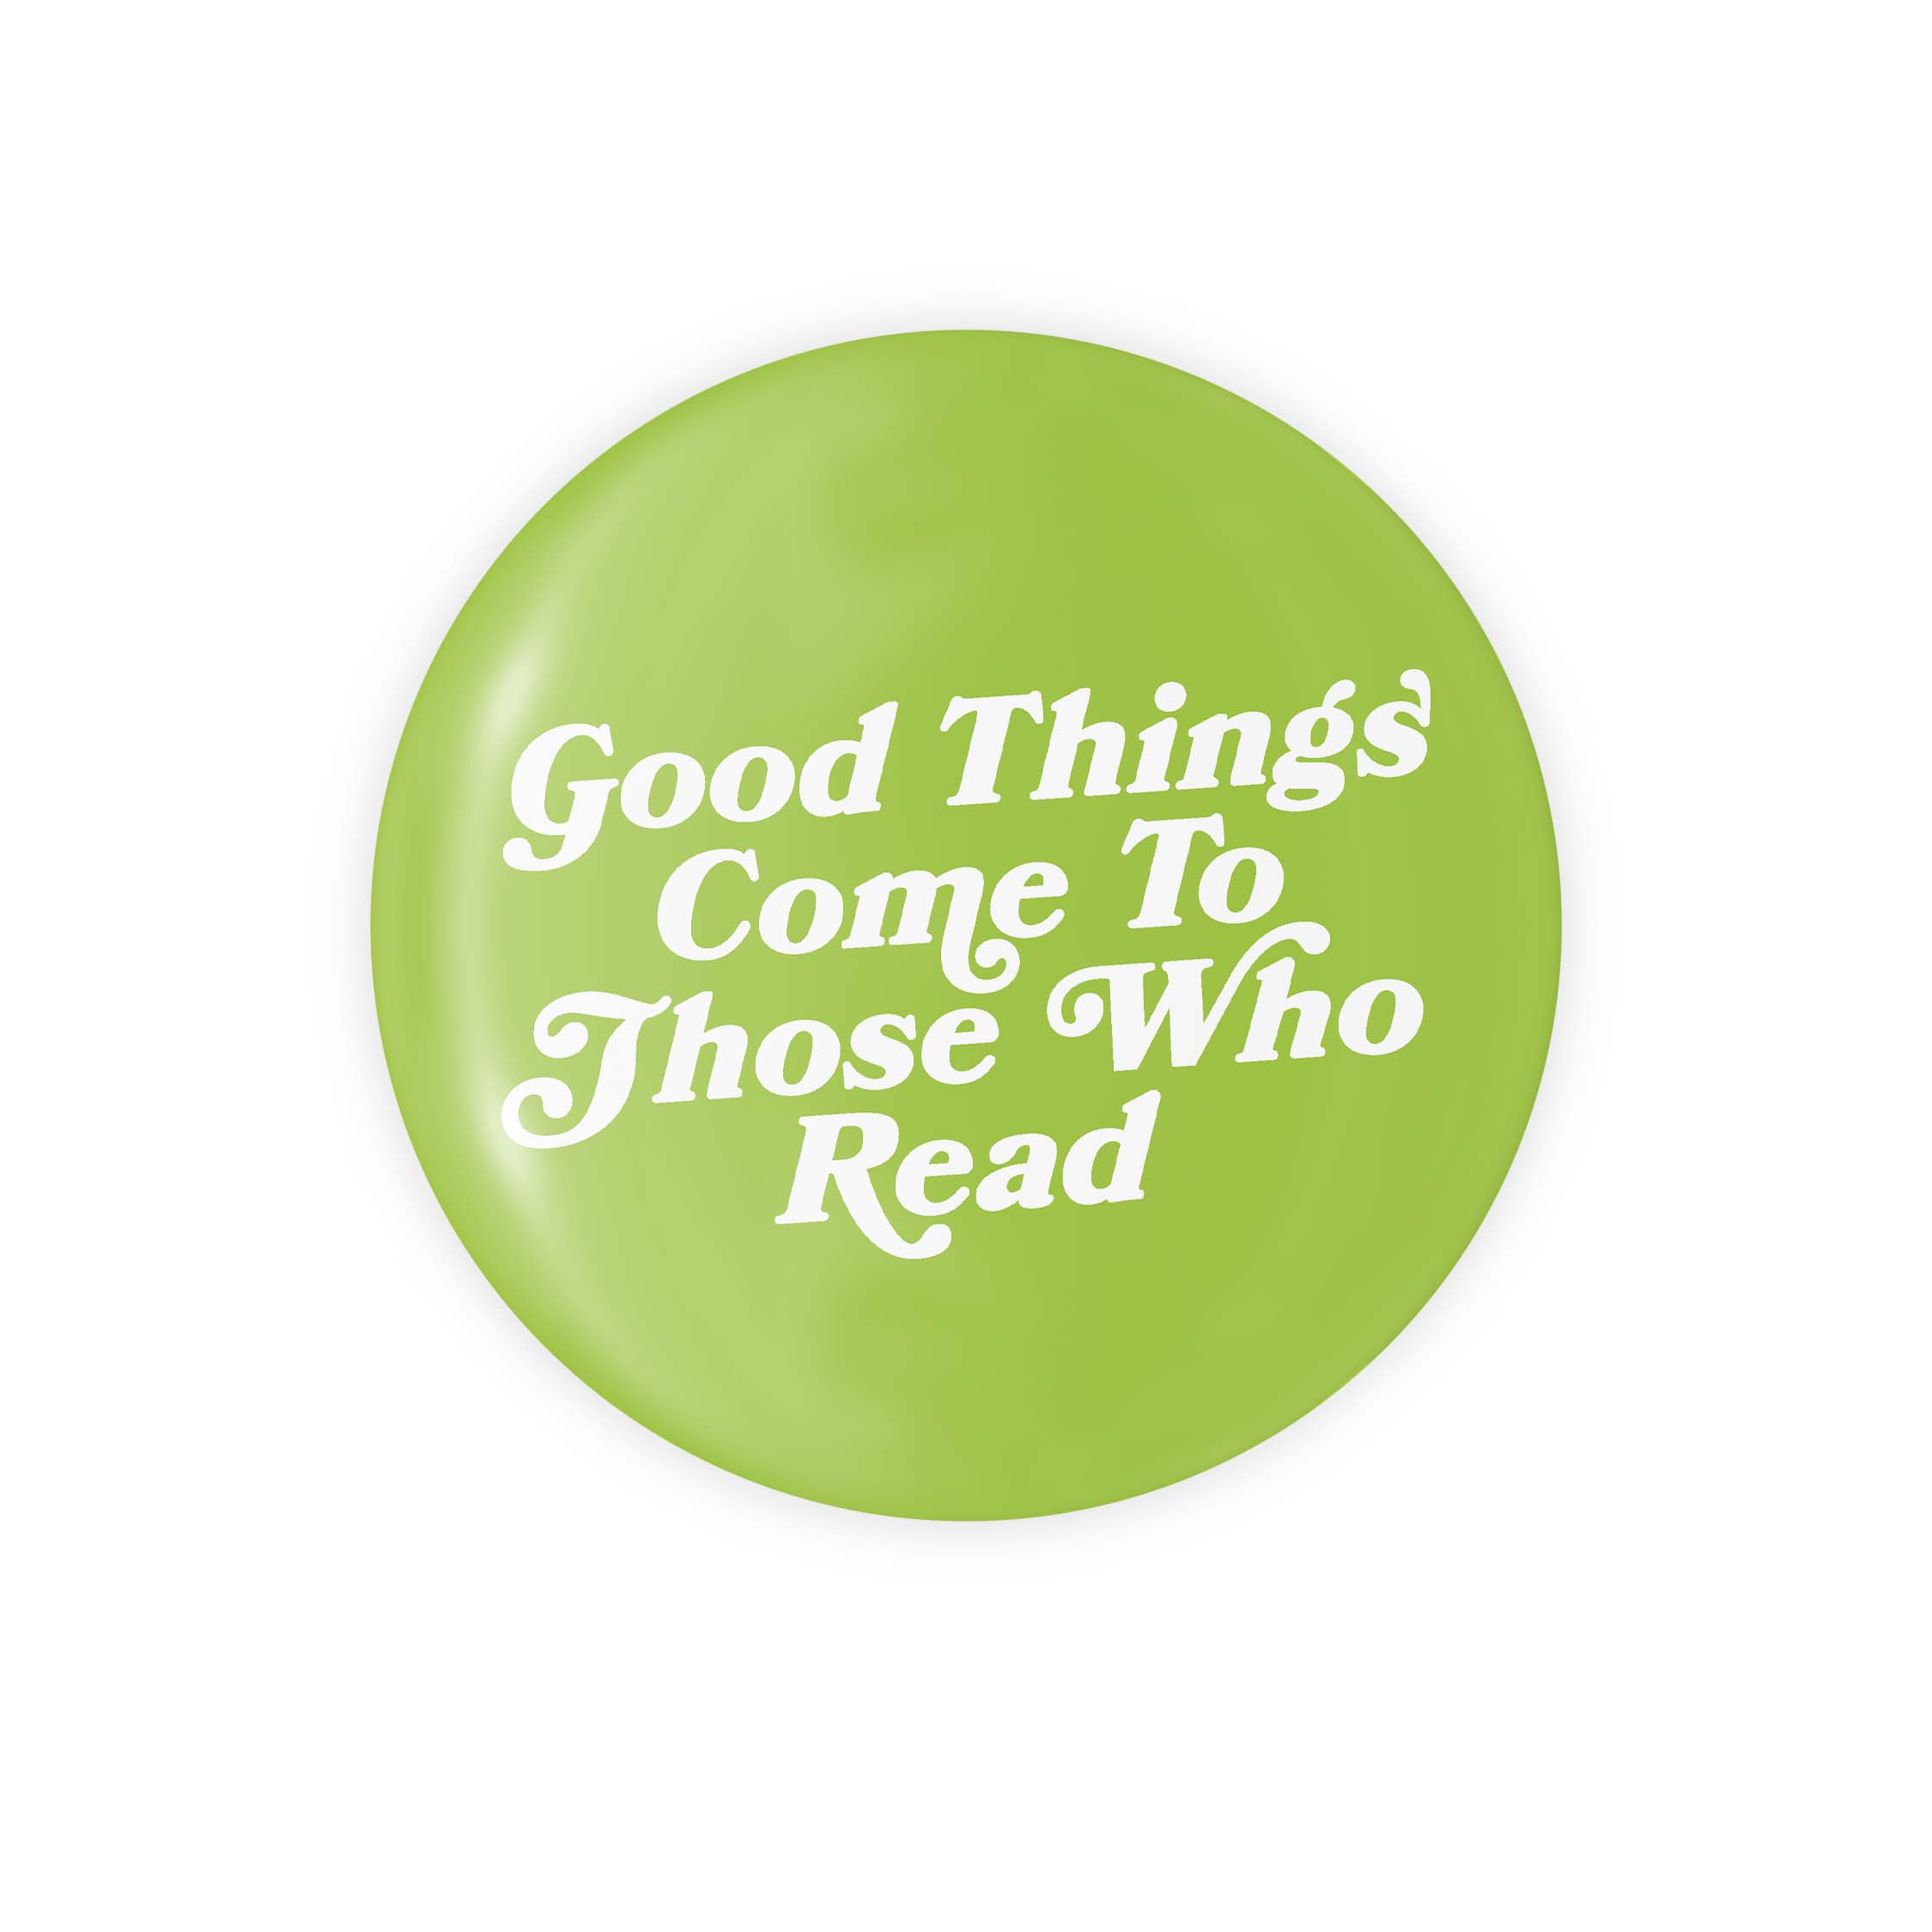 Good Things Come To Those Who Read Button